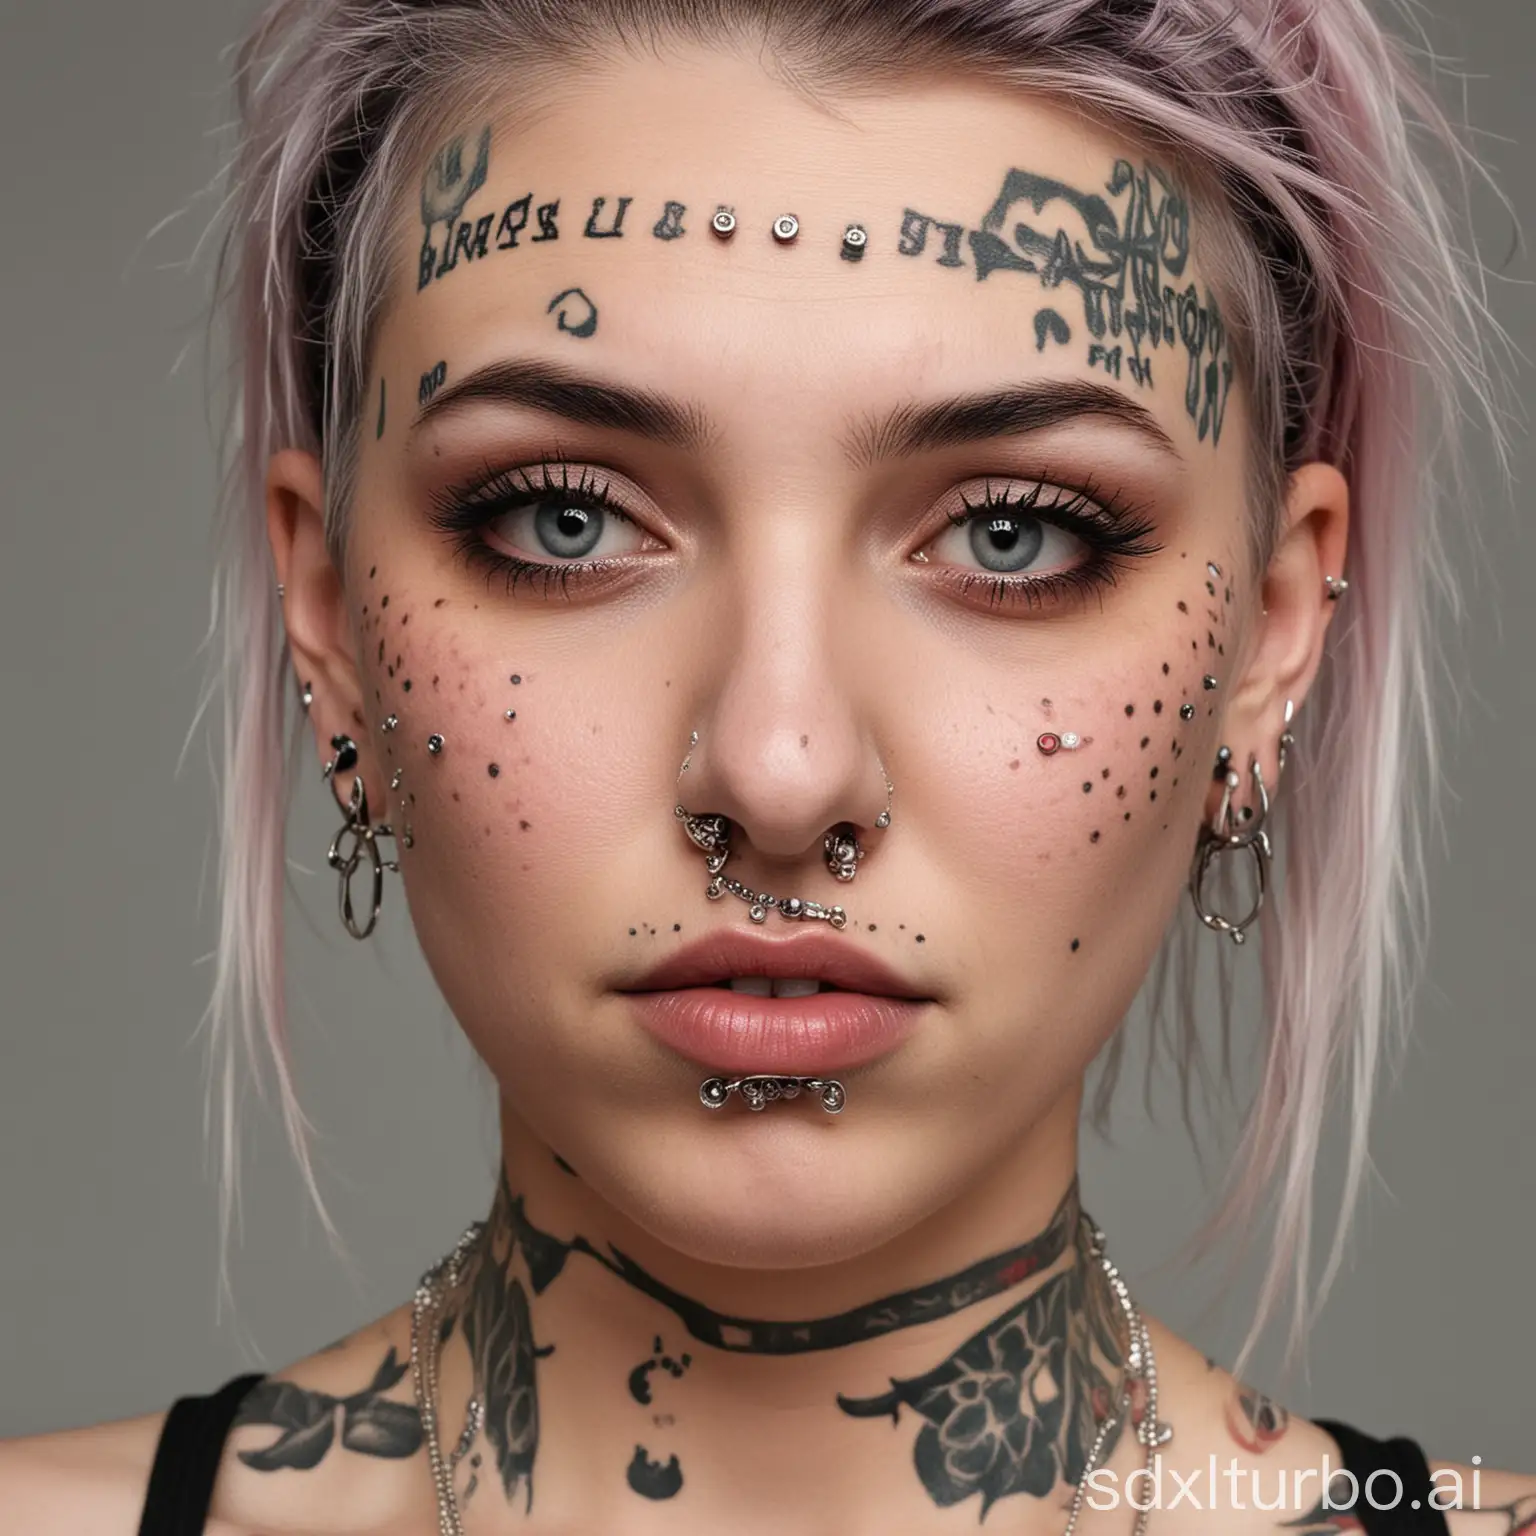 a woman with much too many piercings in her face